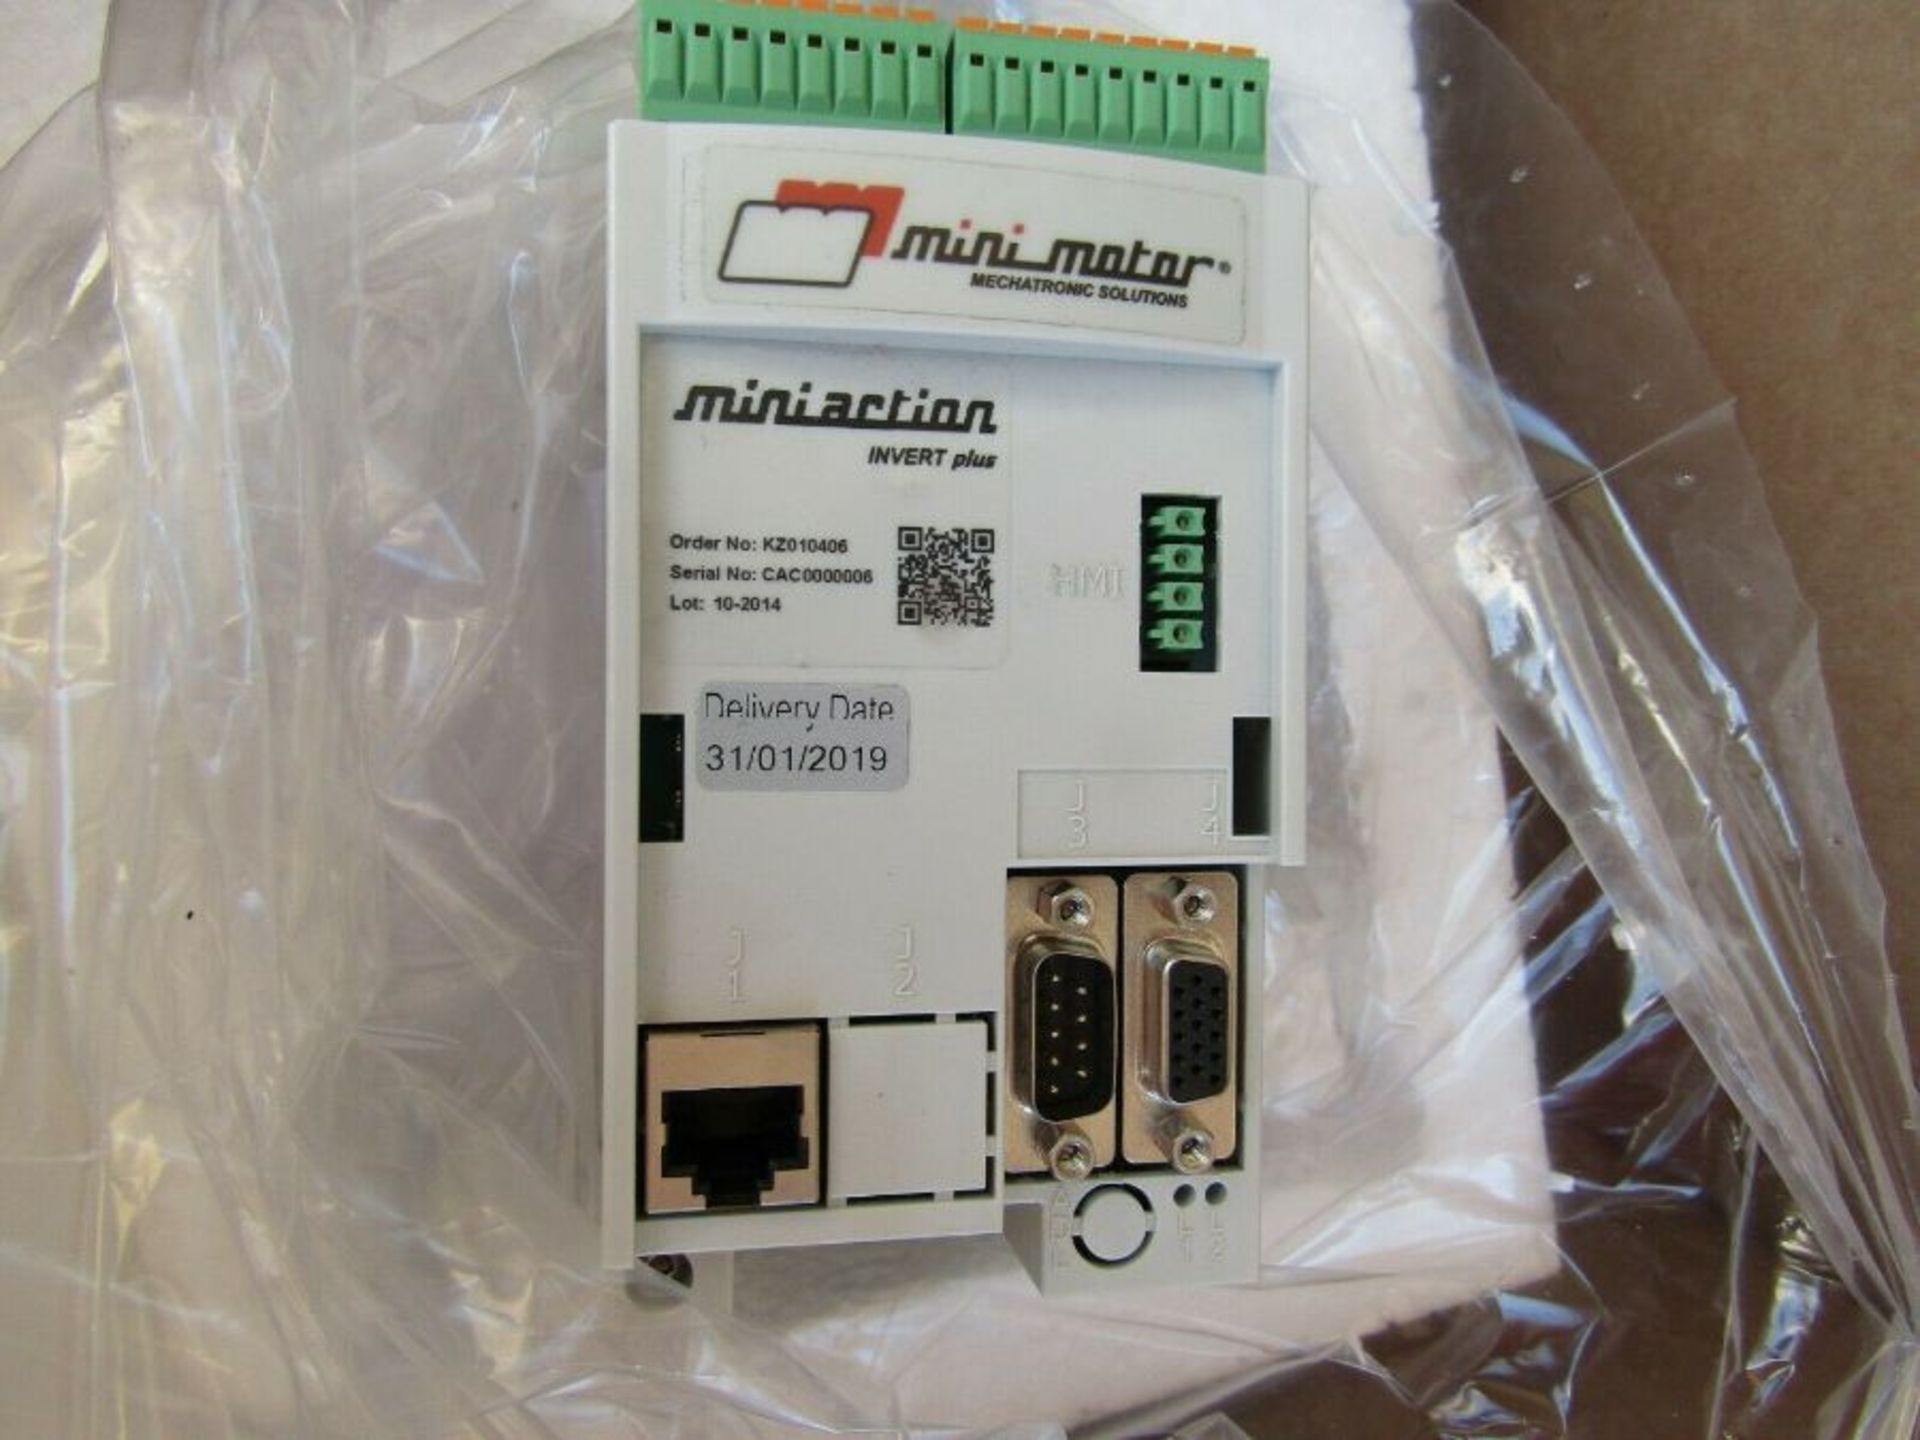 Mini Motor Inverter Drive 3-Phase 0.75kW 230Vac 10A MINIACTION 500 BCL1 1817034 - Image 2 of 2